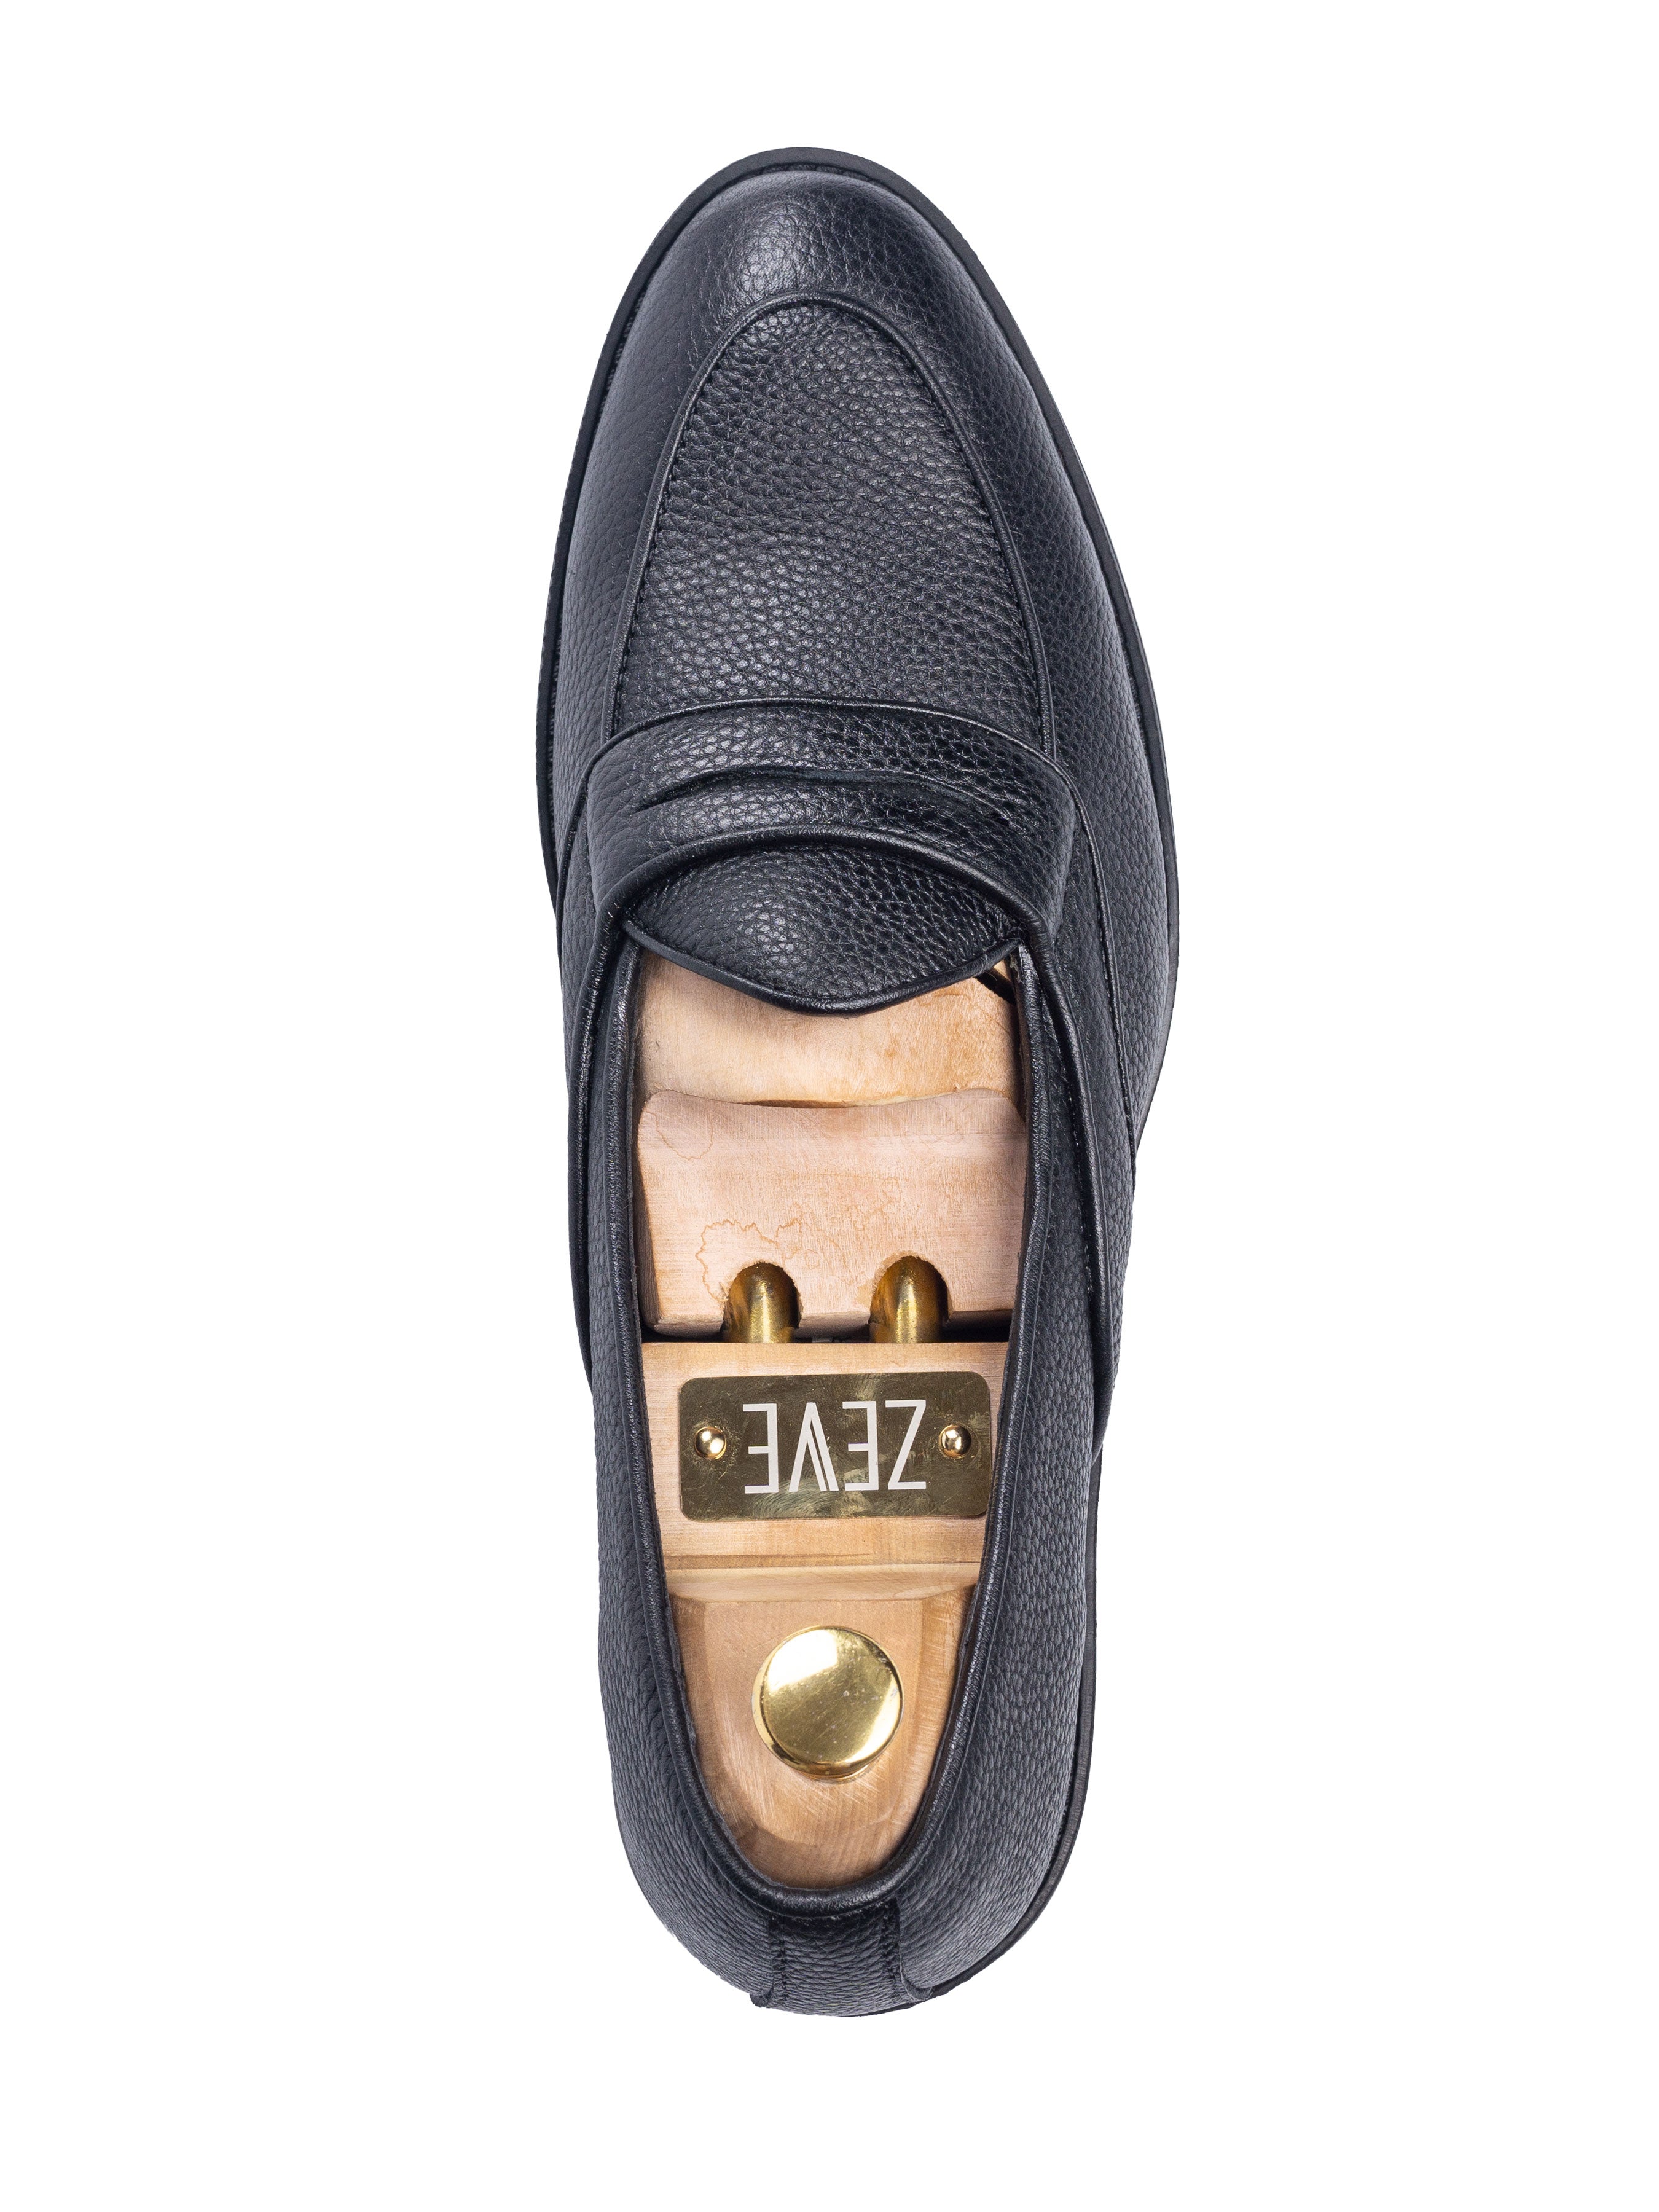 Belgian Loafer with Penny - Black Pebble Grain Leather (Flexi-Sole) - Zeve Shoes